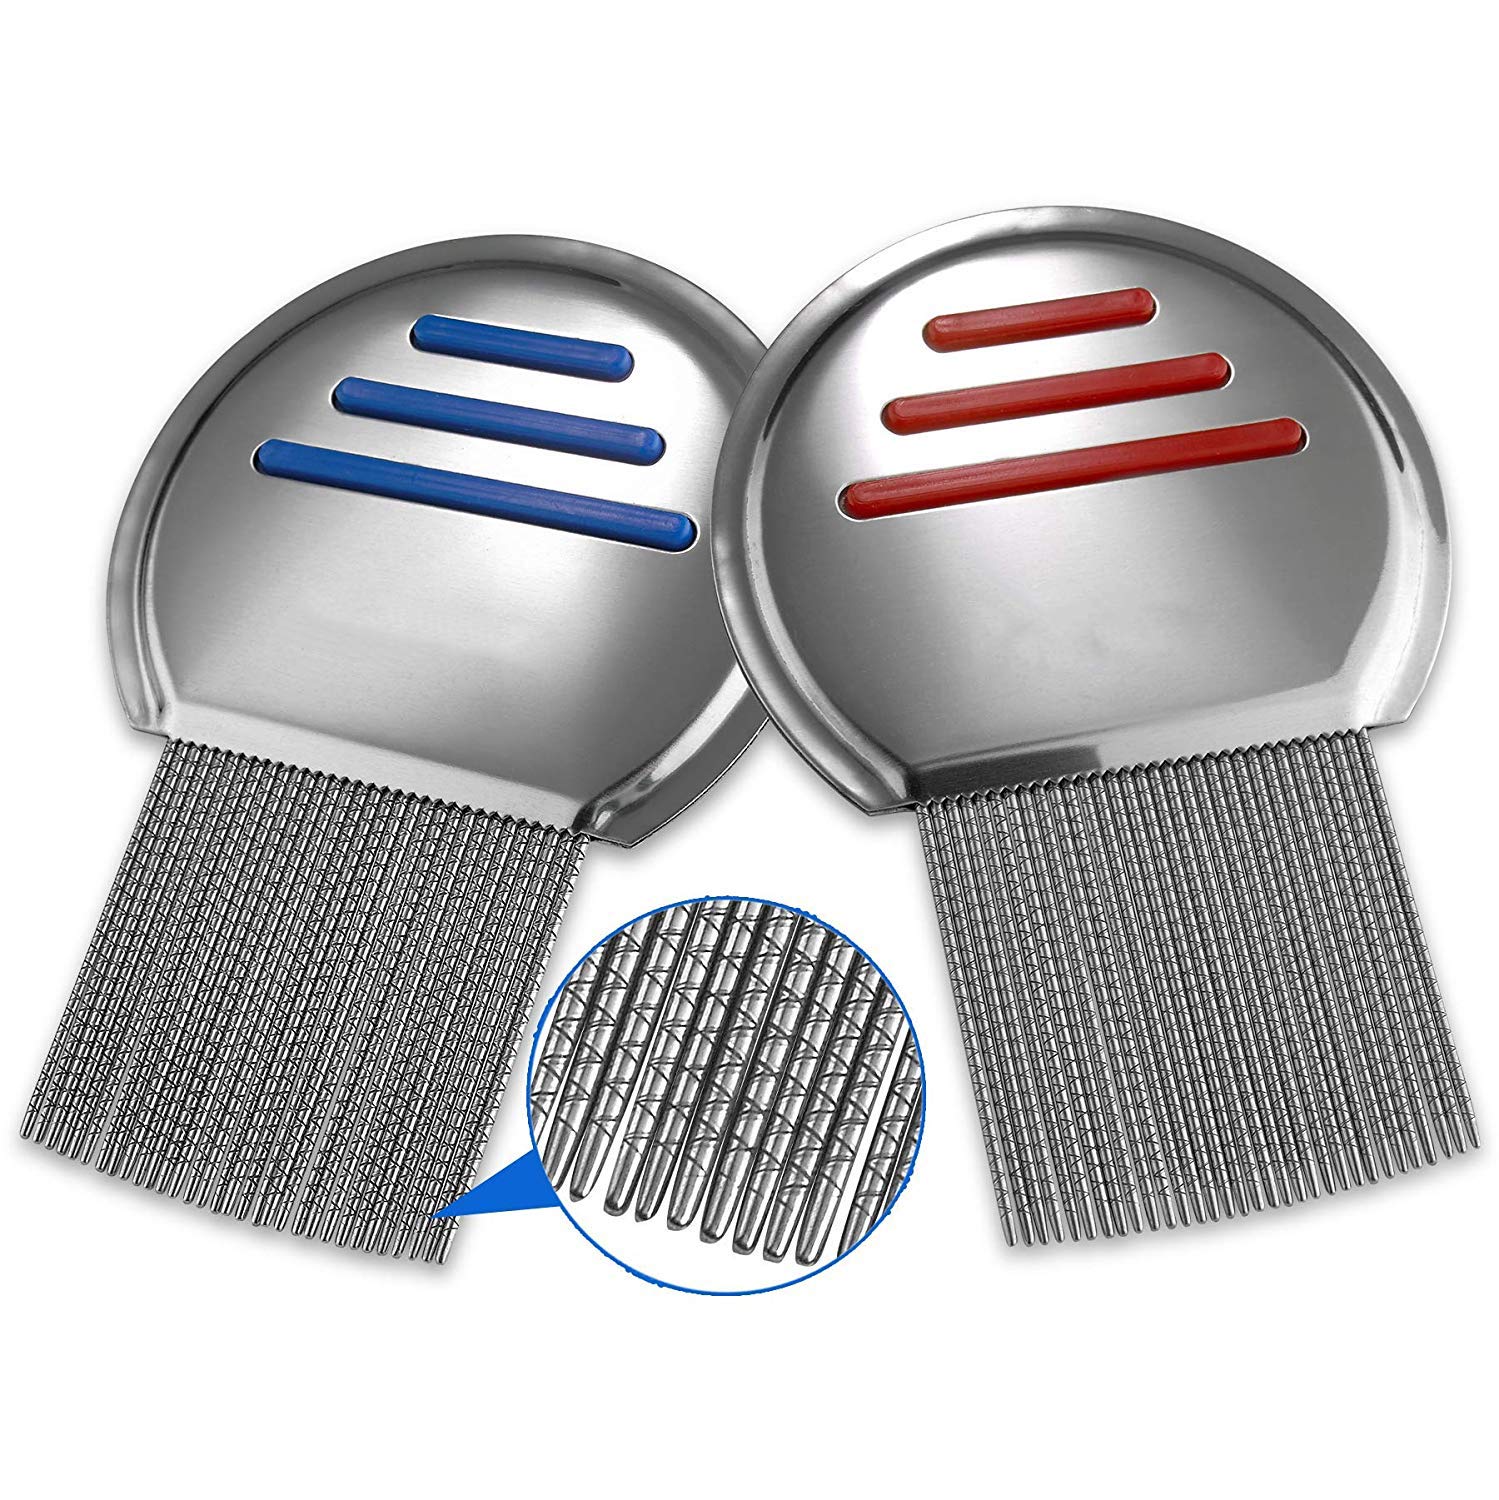 Lice Comb Stainless Steel Professional Lice Combs and Head Lice Treatment to Effectively Get Rid of Hair Lice and Nits, Best Results for Infection and Re-Infection in Kids & Adults ((Pack of 1))